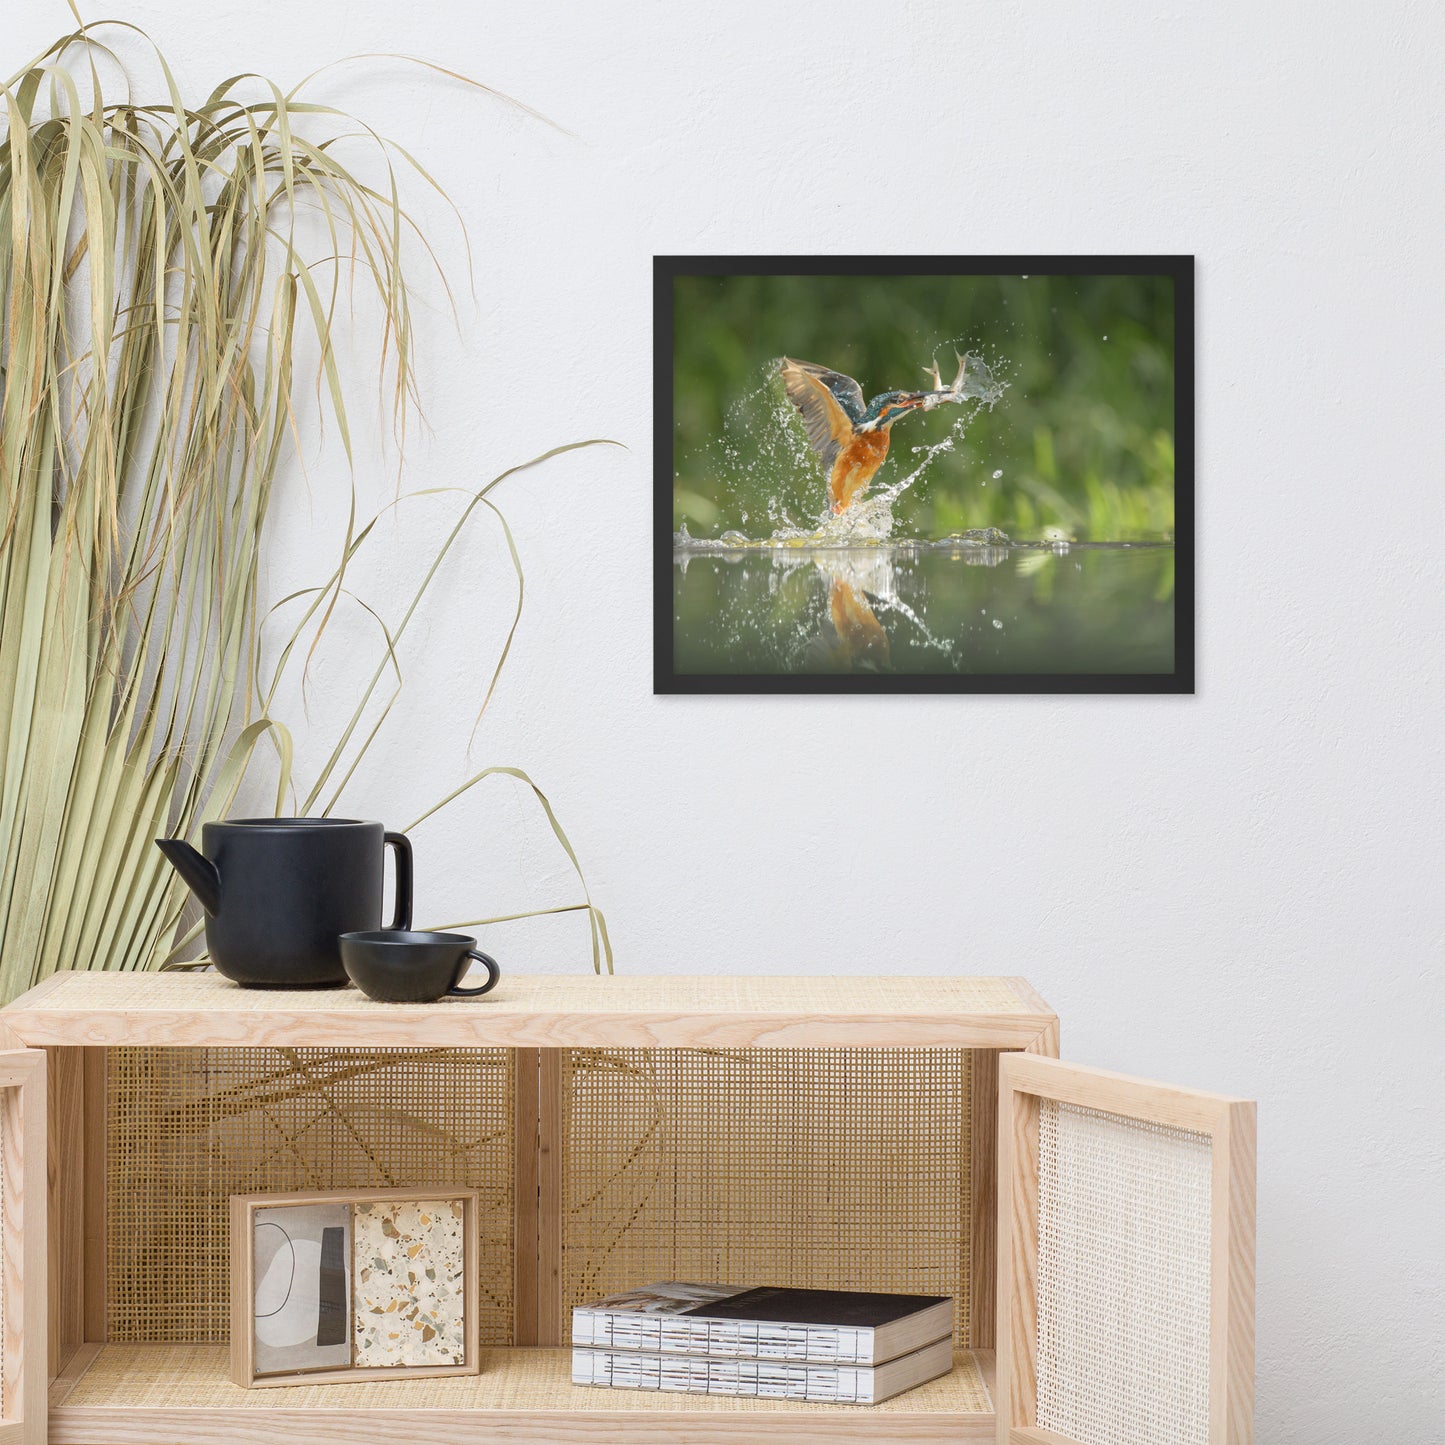 Flying Turquoise Blue and Orange Common Kingfisher Bird With Fish Animal Wildlife Photograph Framed Wall Art Prints